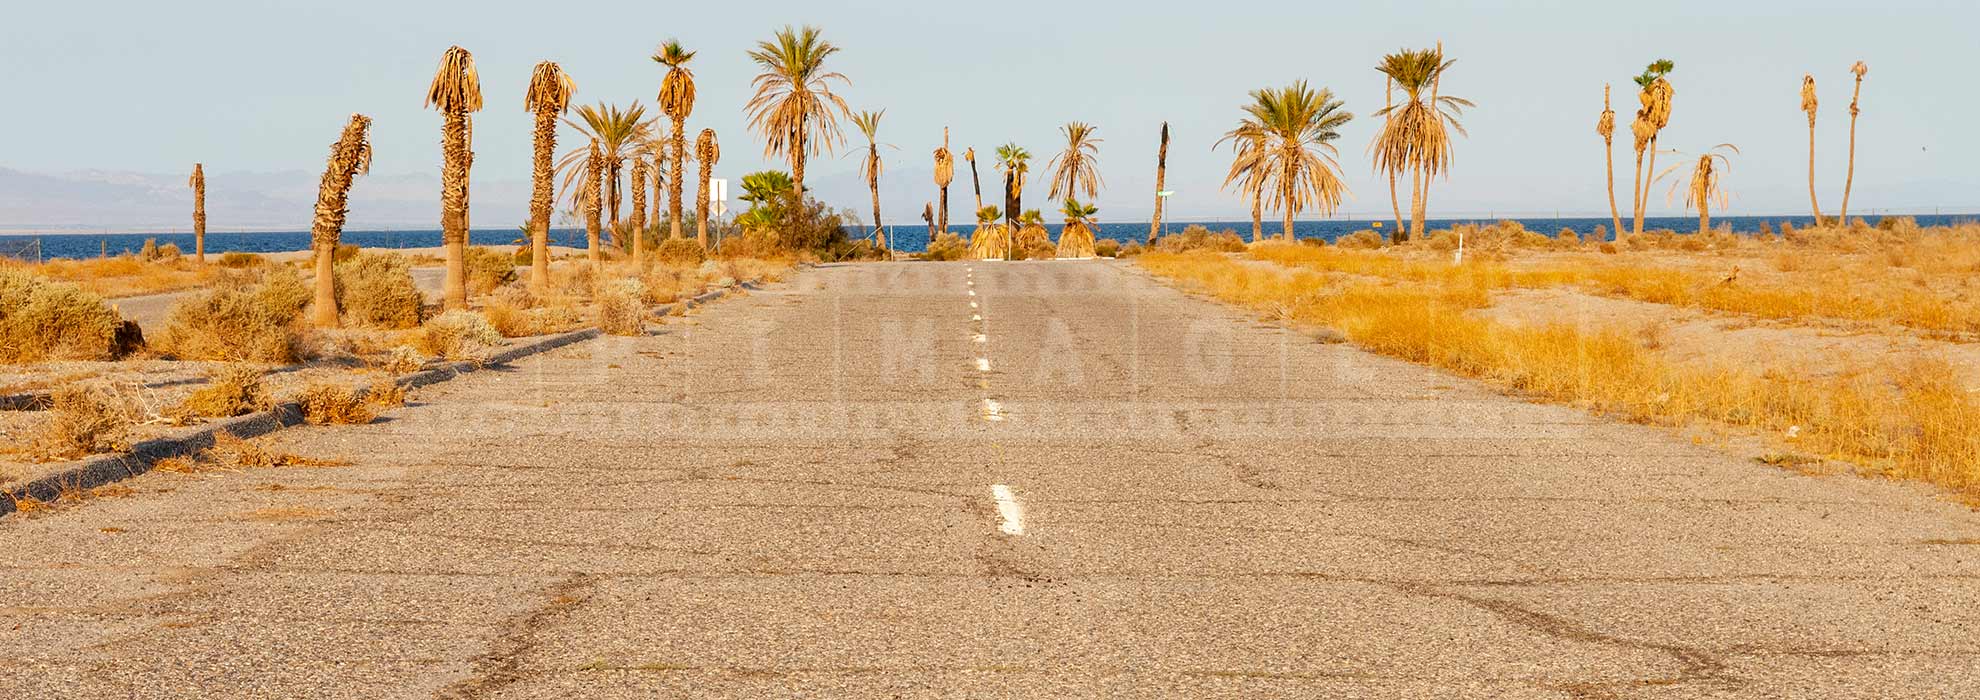 Dying palm trees and abandoned street